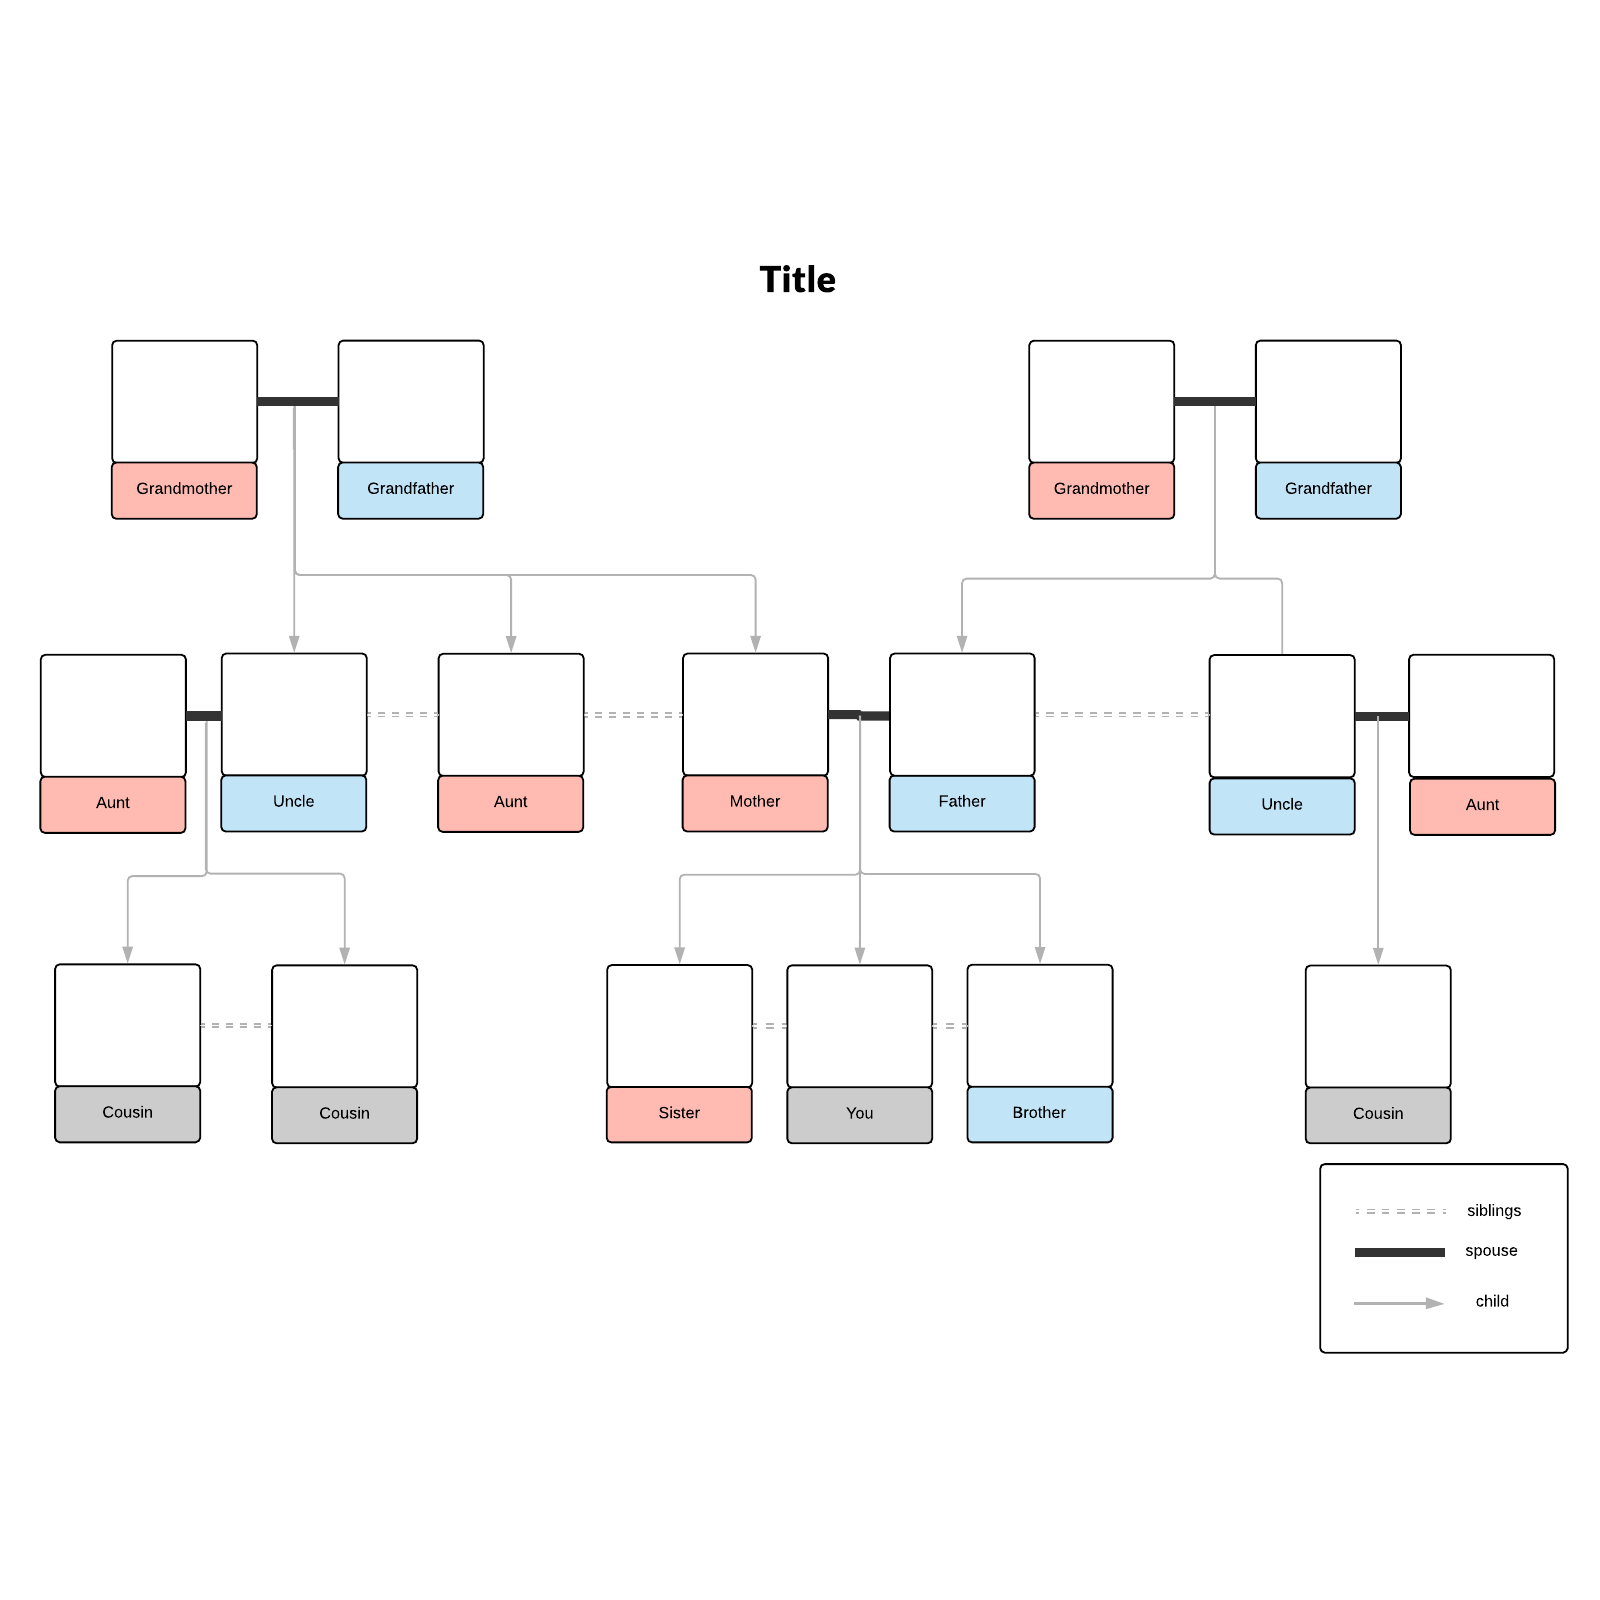 Extended family tree example